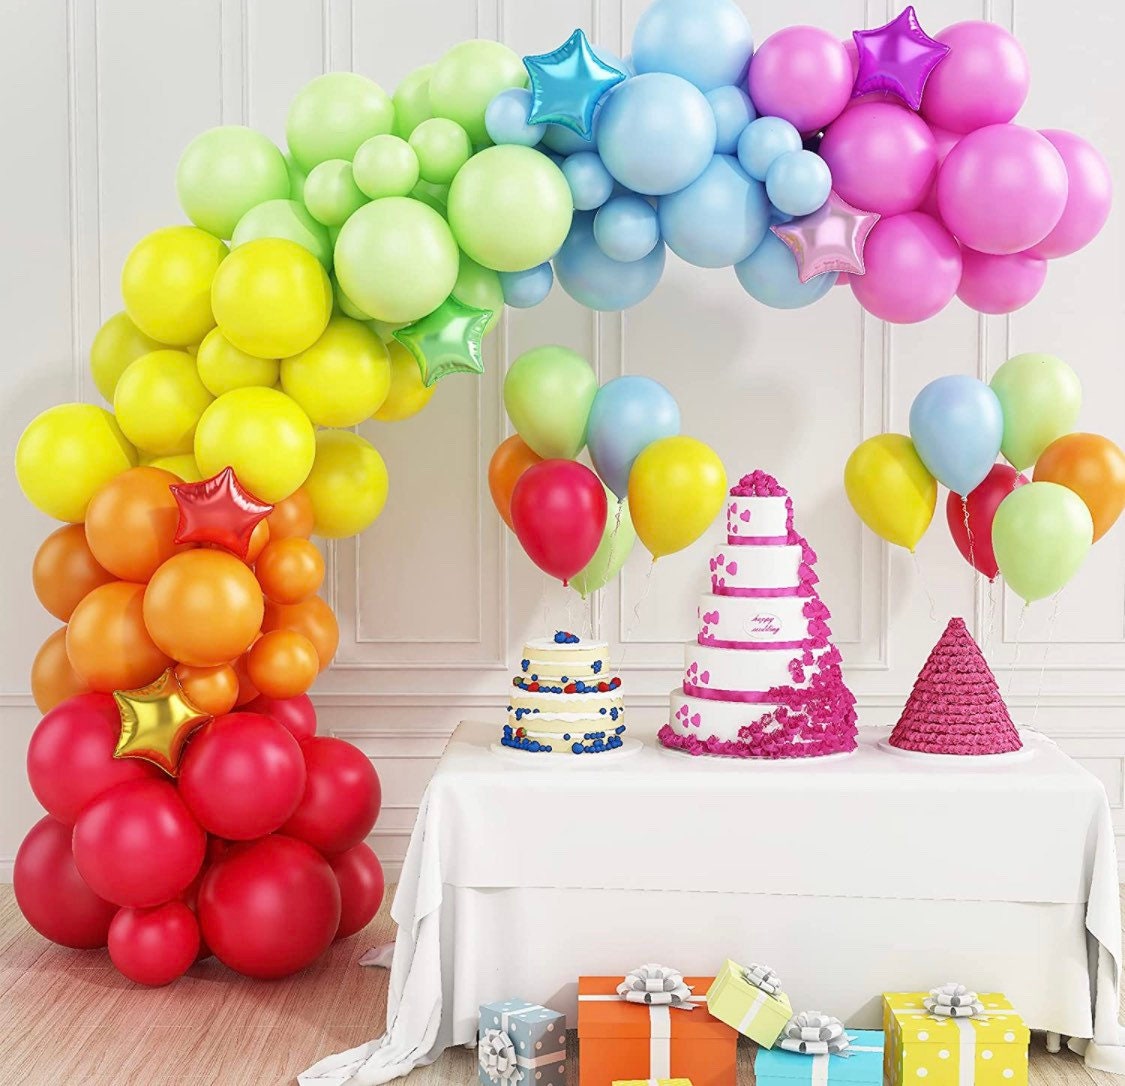 Linking Balloon Arch And Flower Balloon Display